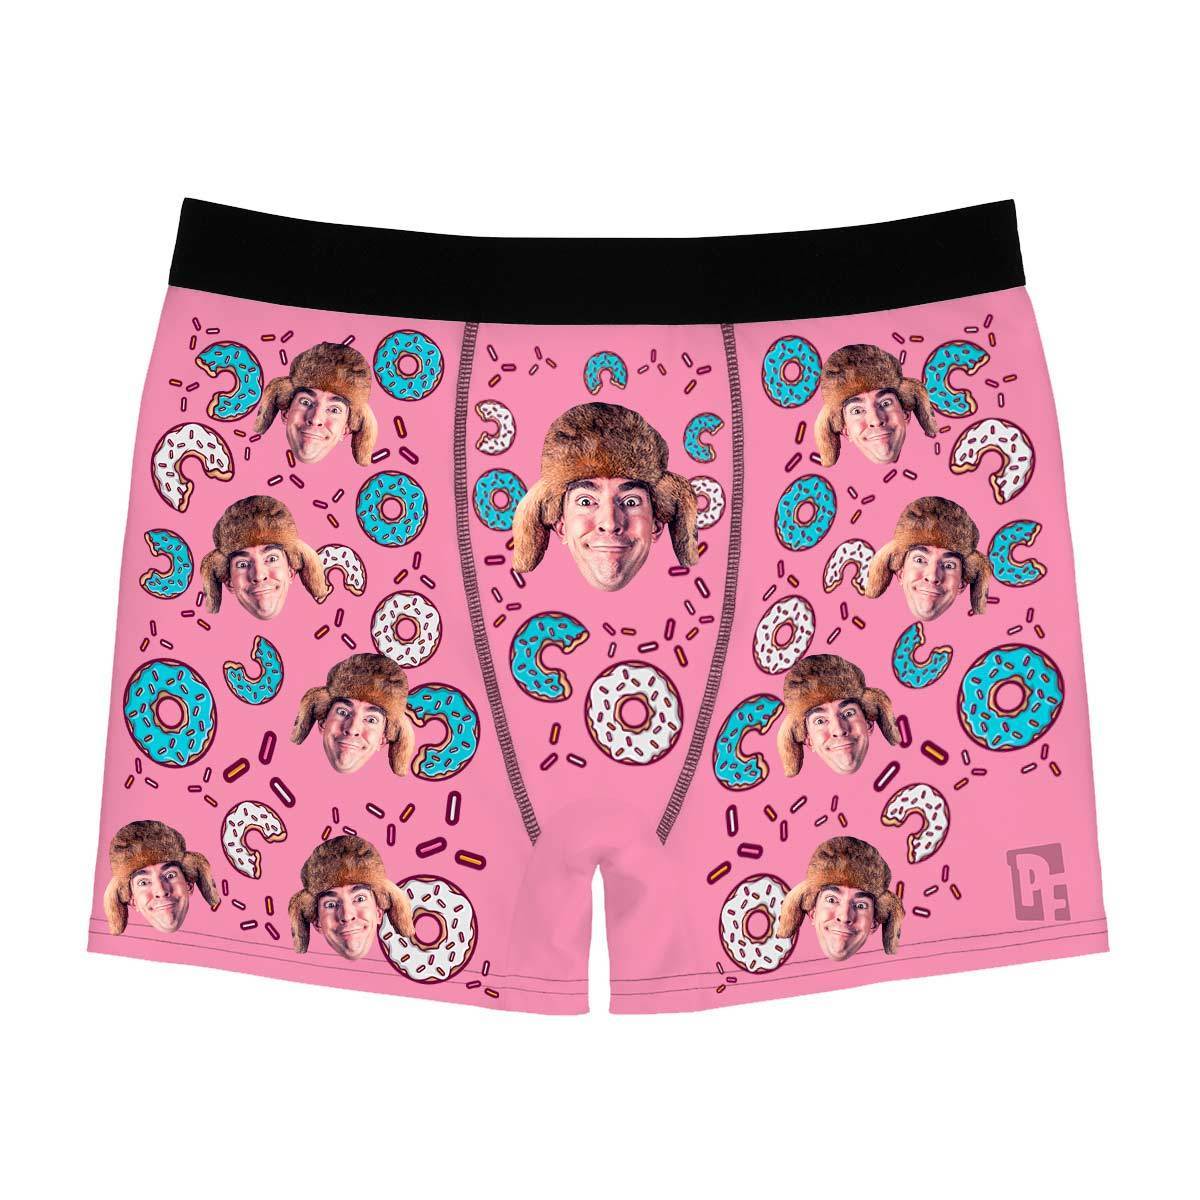 Pink Donuts men's boxer briefs personalized with photo printed on them